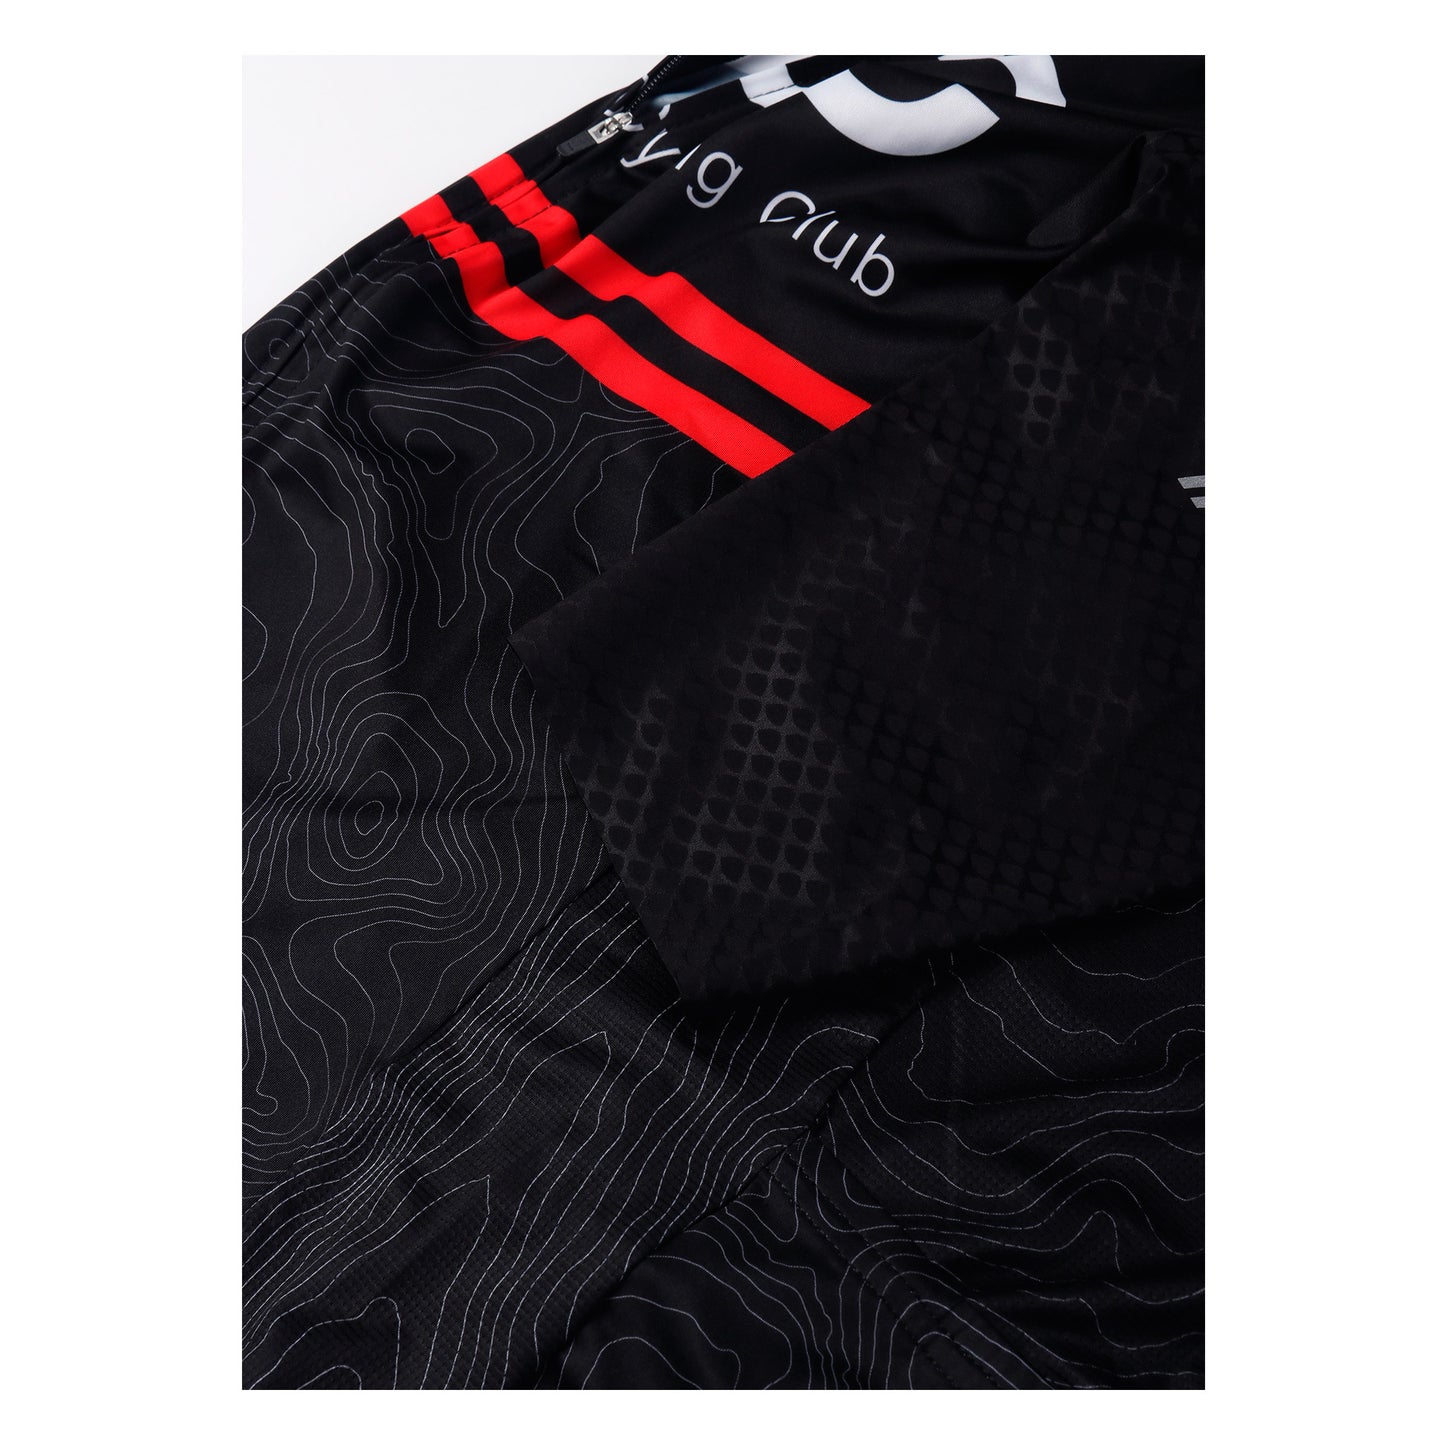 ACC Stellar sustainable cycling short sleeve jersey race cut from Ascender Cycling Club Zürich Switzerland Presentation in Details from Aerodynamic Sleeves and Fabrics